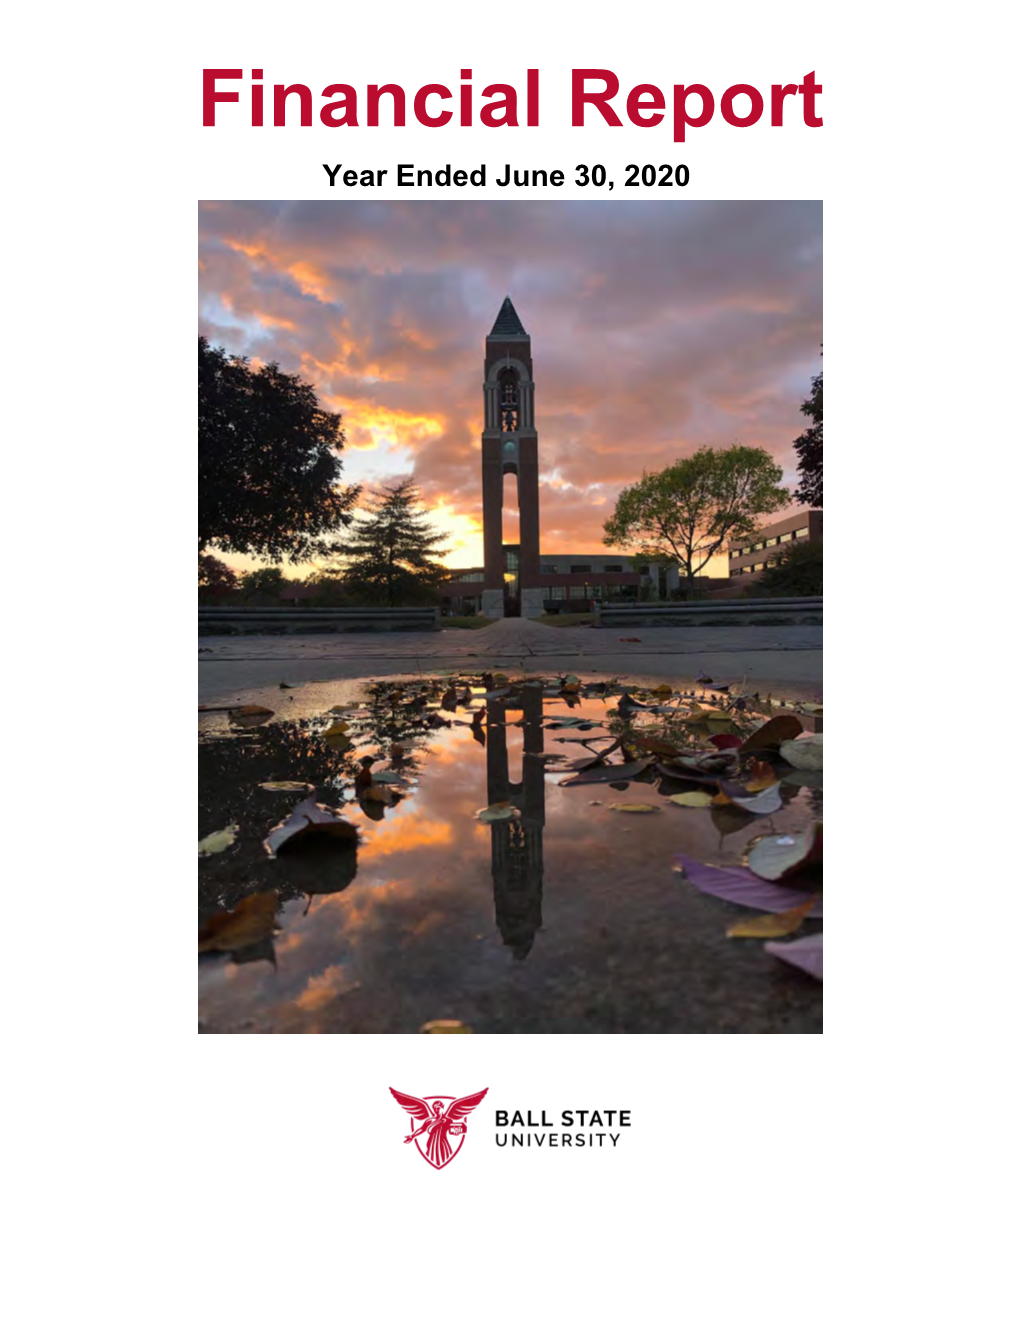 Financial Report Year Ended June 30, 2020 Front Cover: Shafer Tower